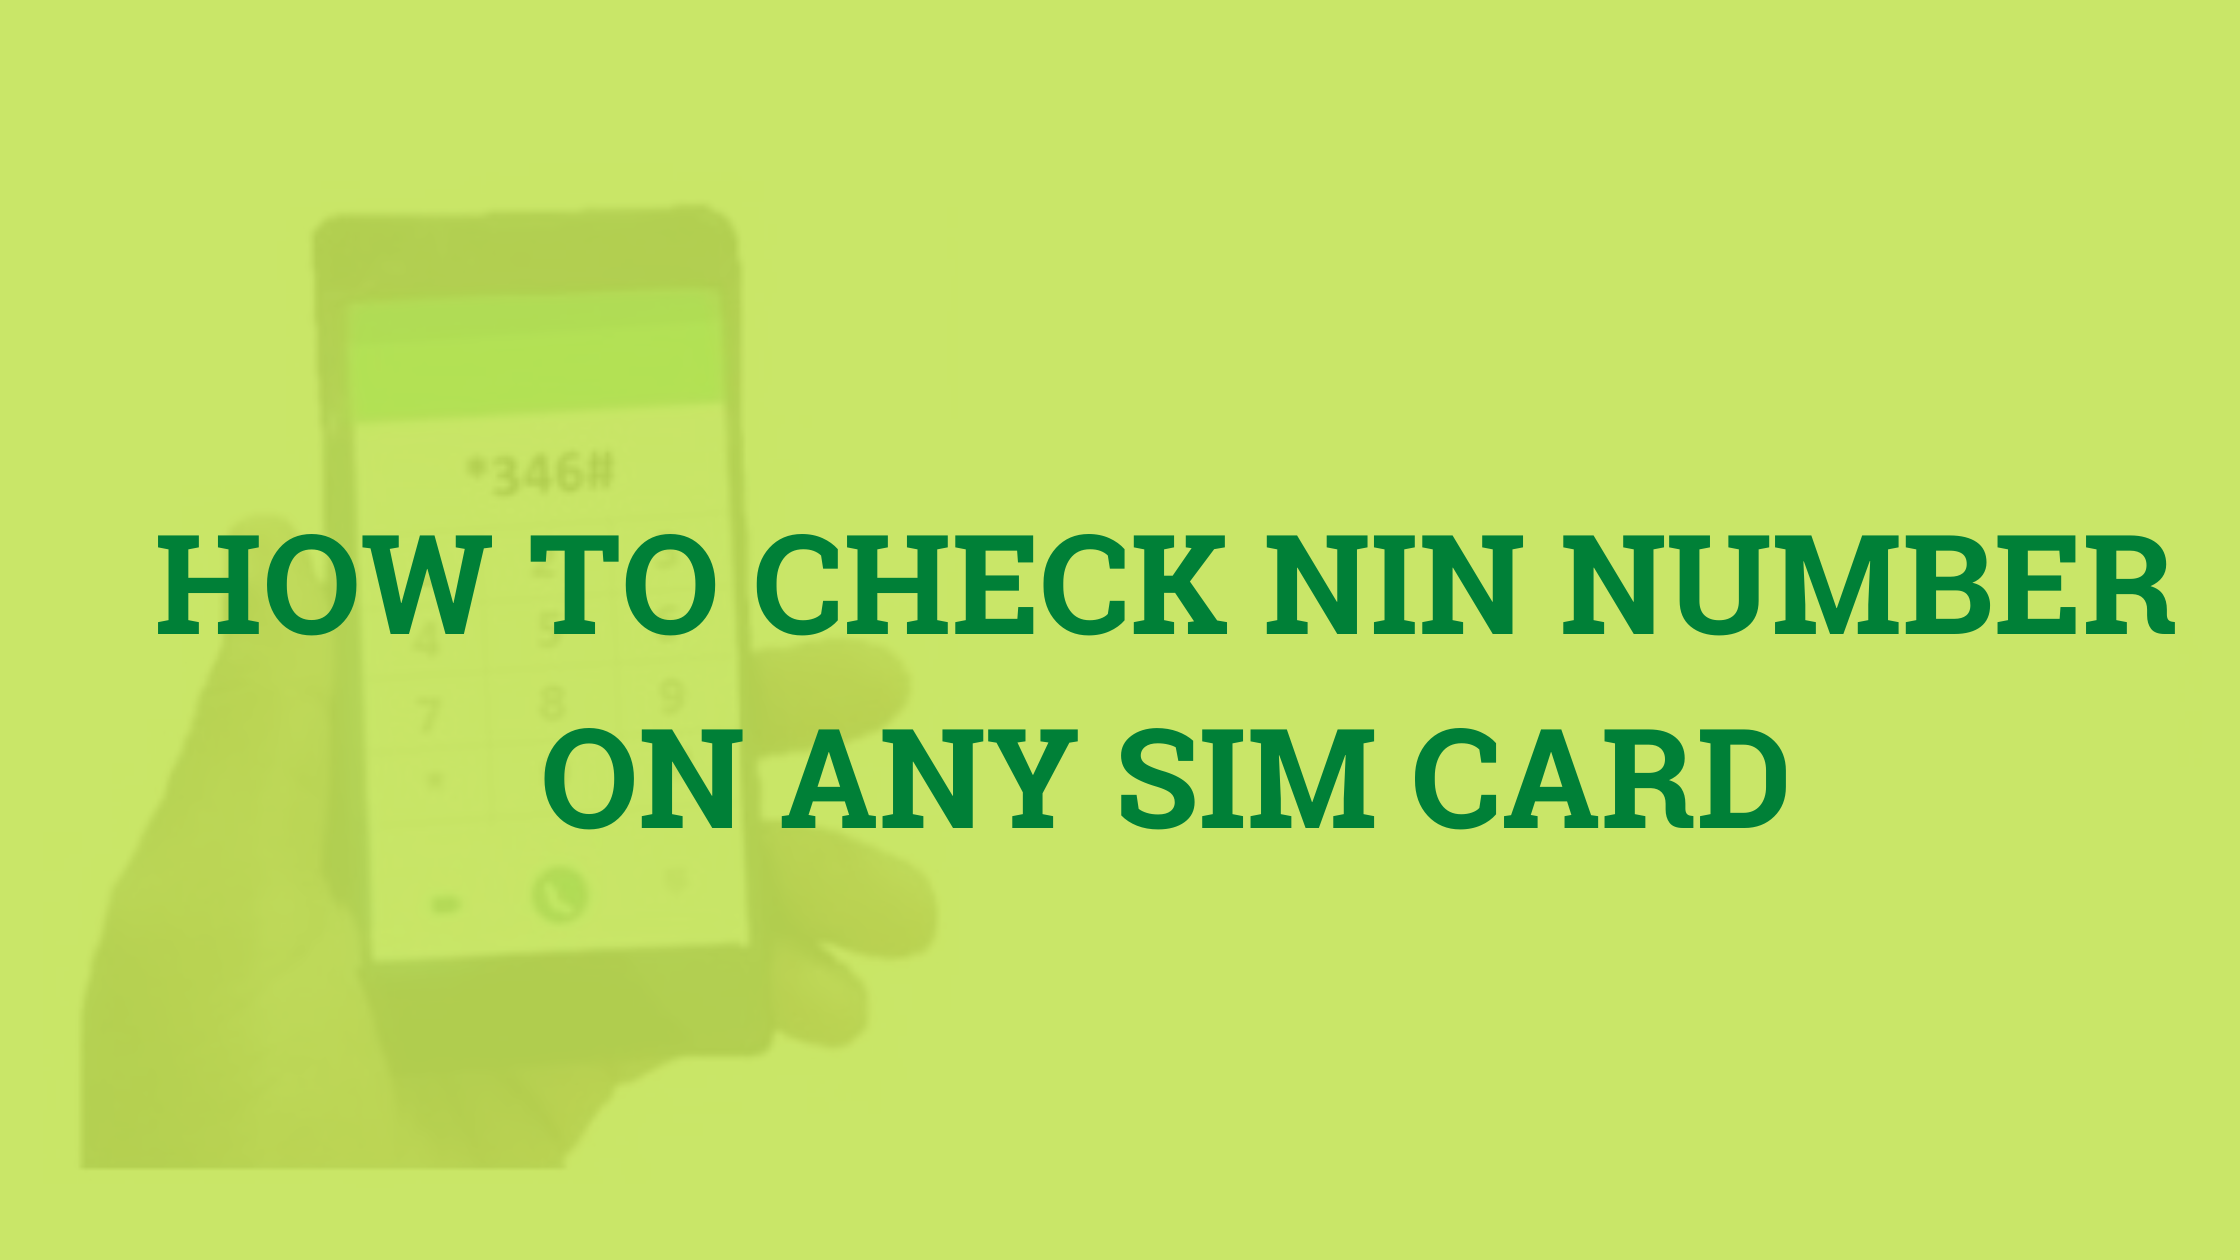 how to check nin number